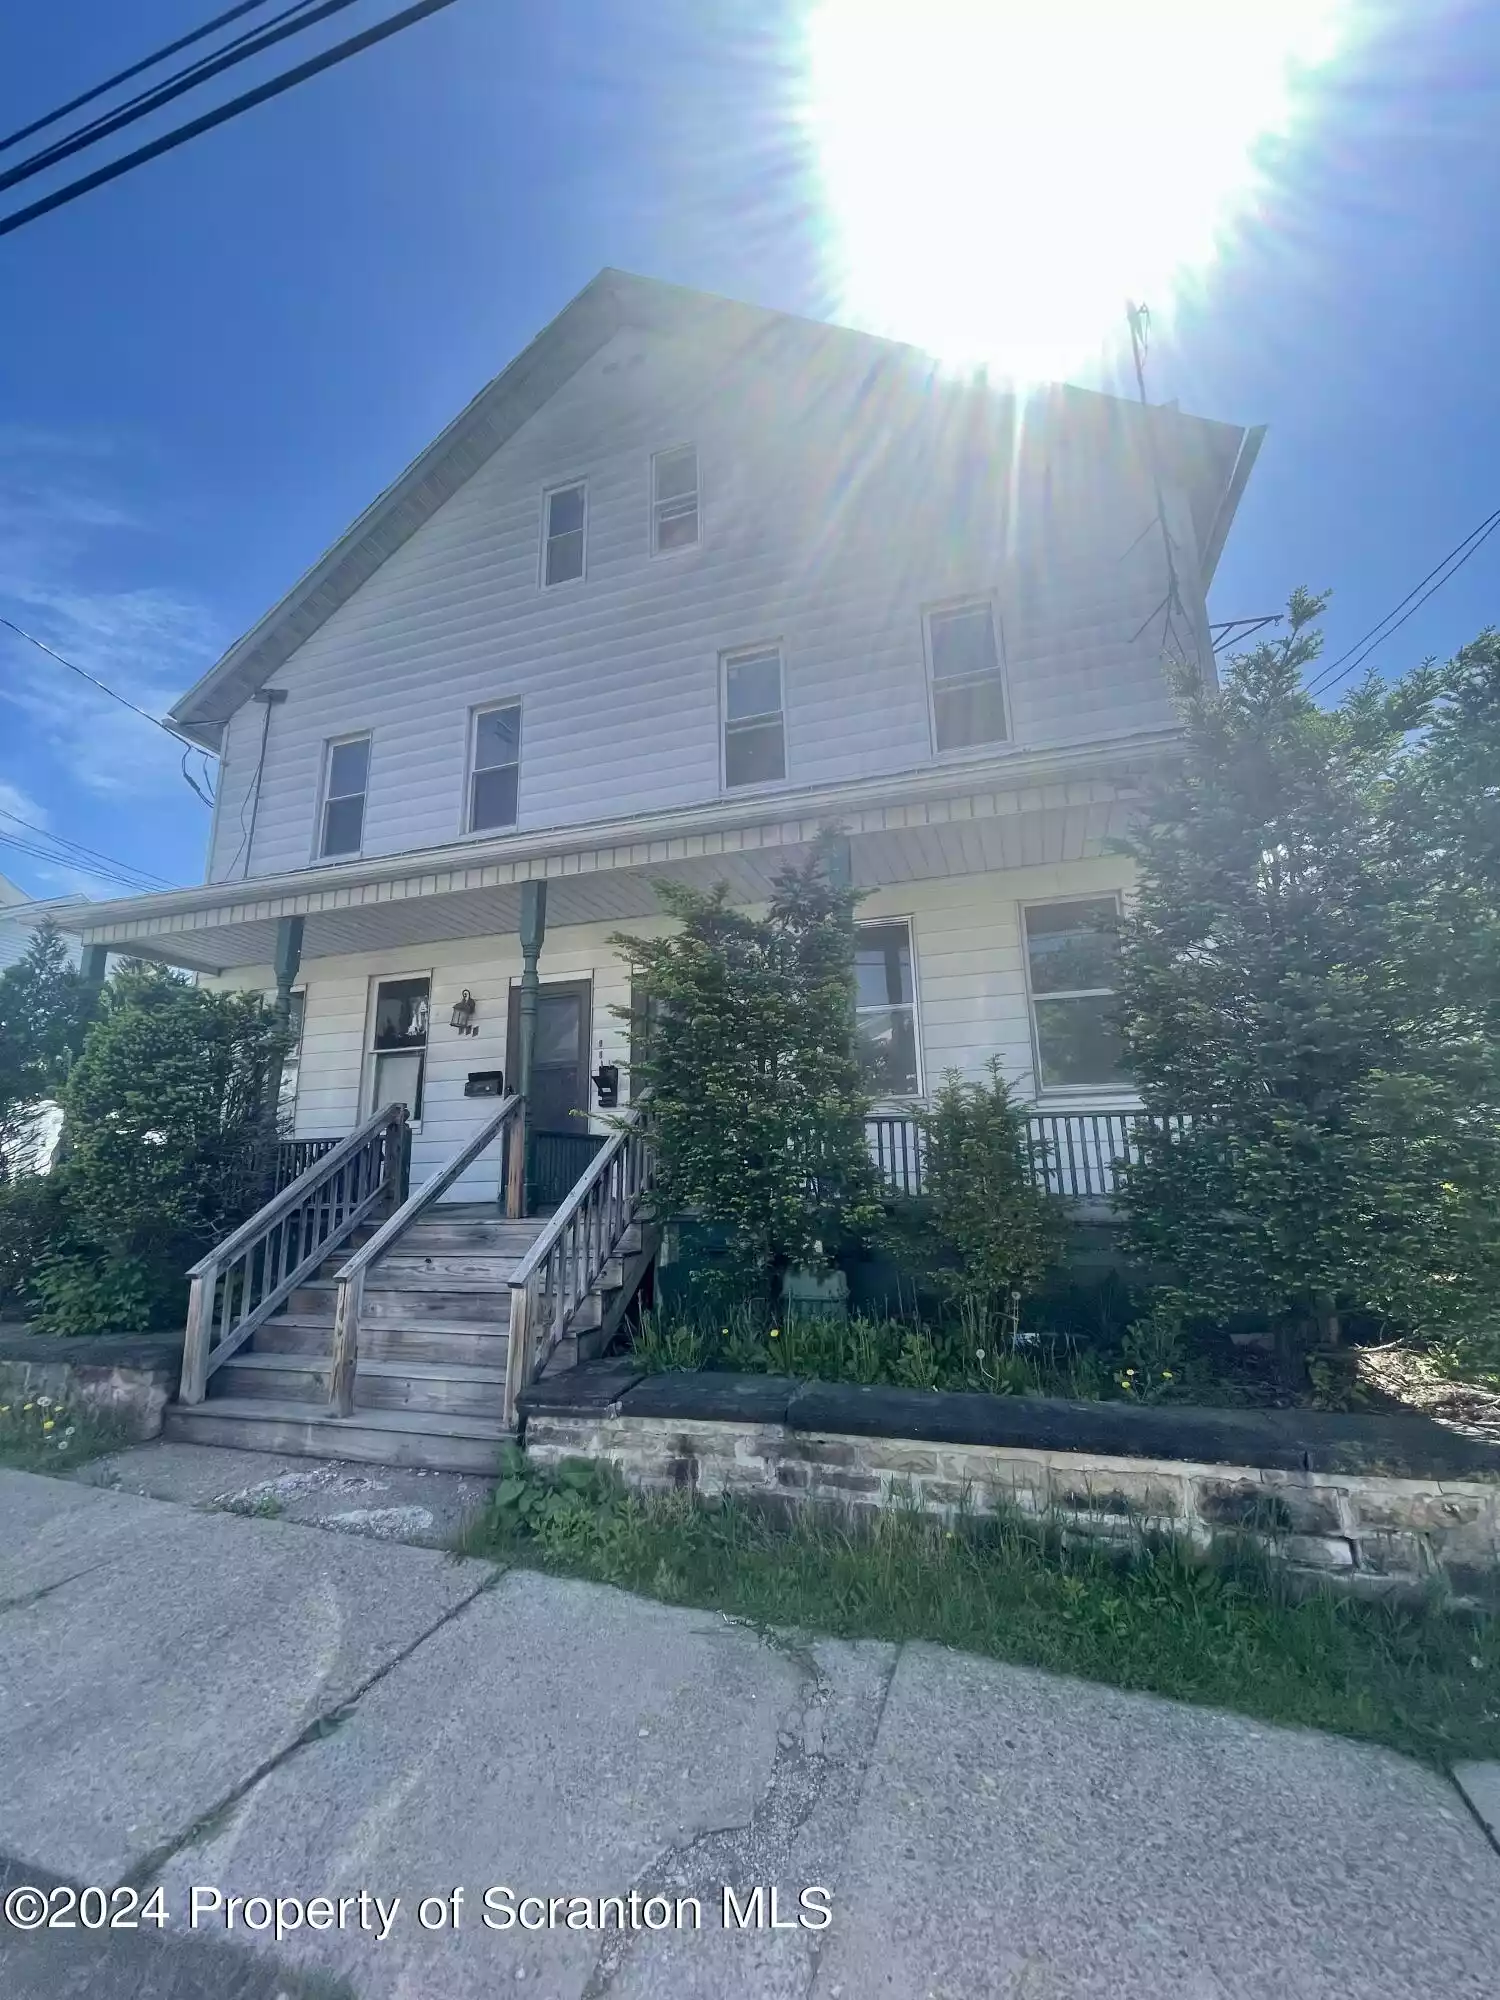 126 Lincoln Avenue, Scranton, Pennsylvania 18504, 3 Rooms Rooms,1 BathroomBathrooms,Residential Lease,For Lease,Lincoln,GSBSC2487